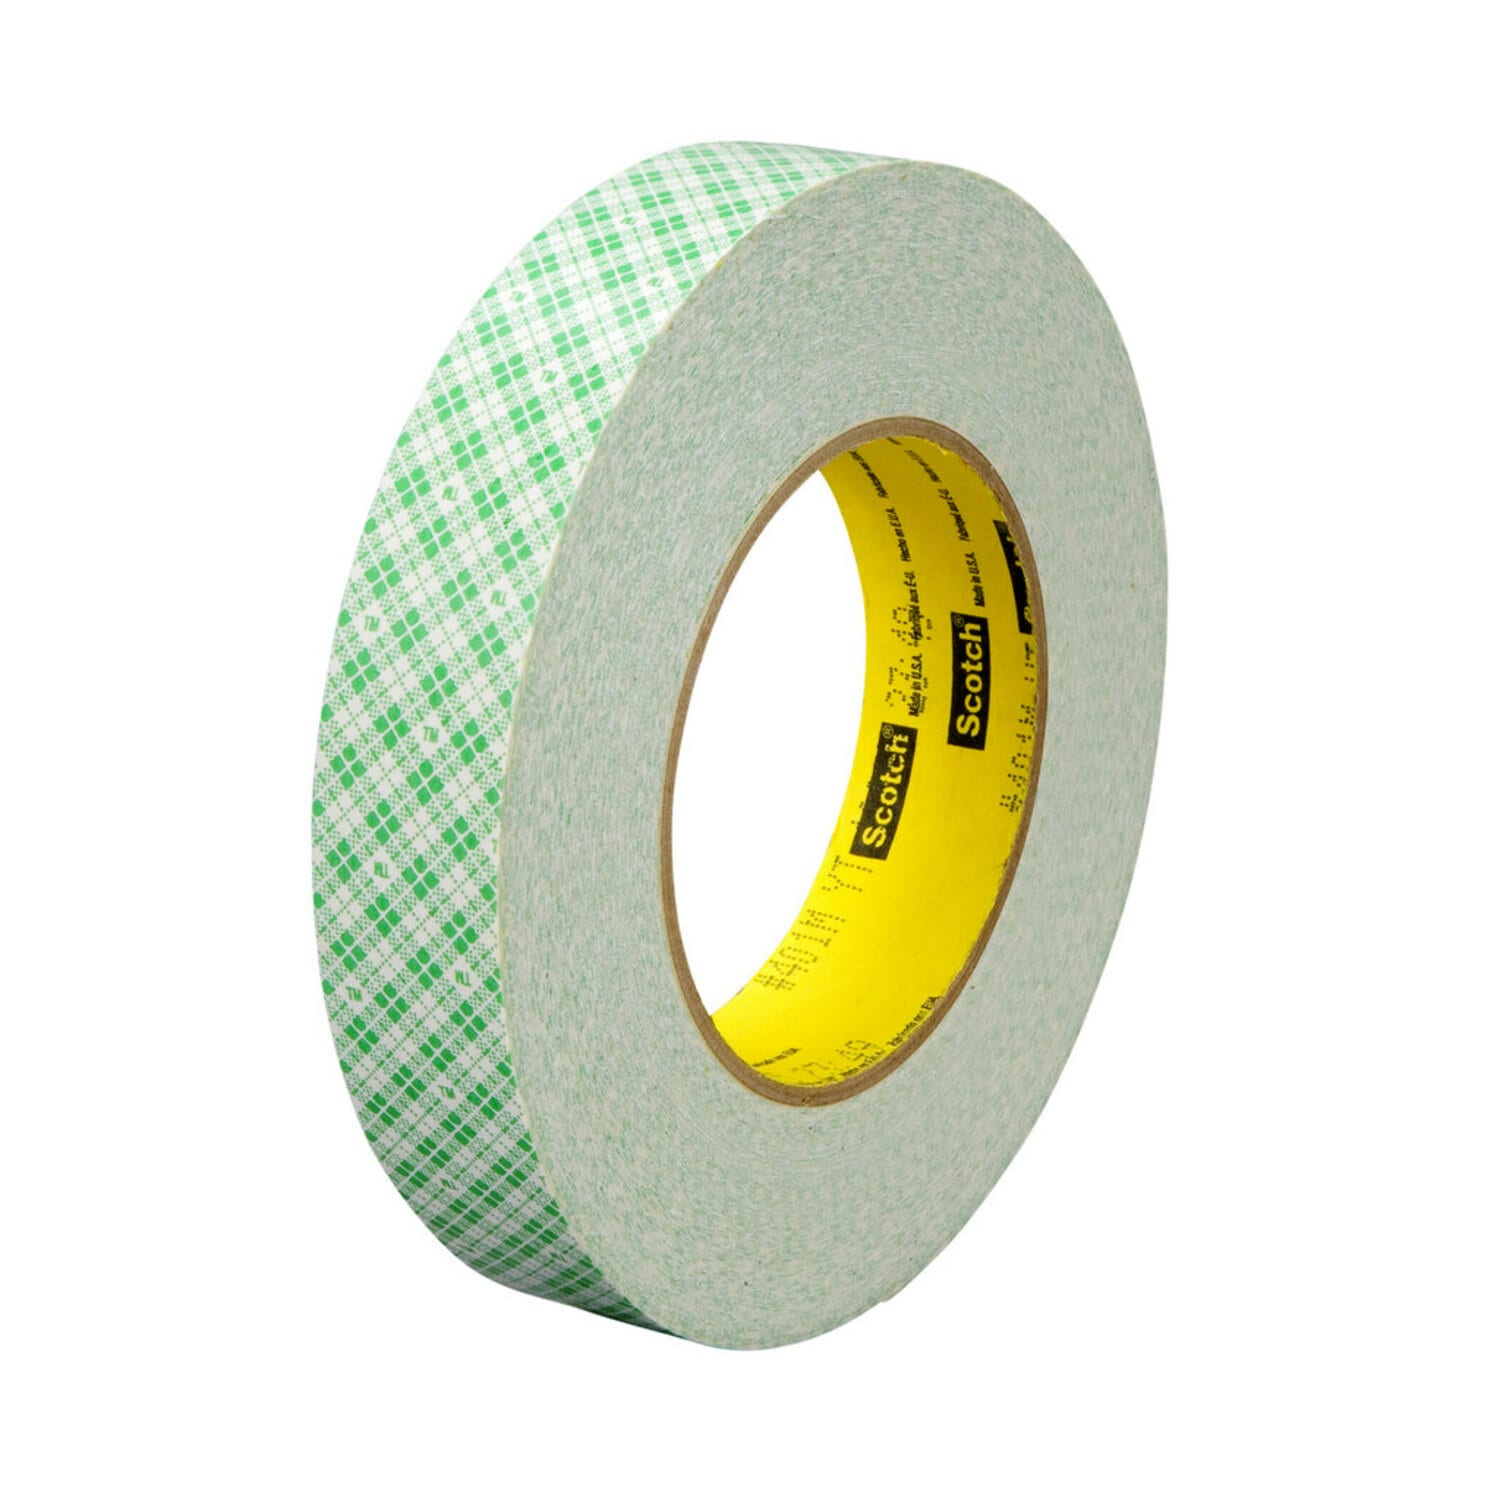 7000144721 - 3M Double Coated Paper Tape 401M, Natural, 1 in x 36 yd, 9 mil, 36
rolls per case